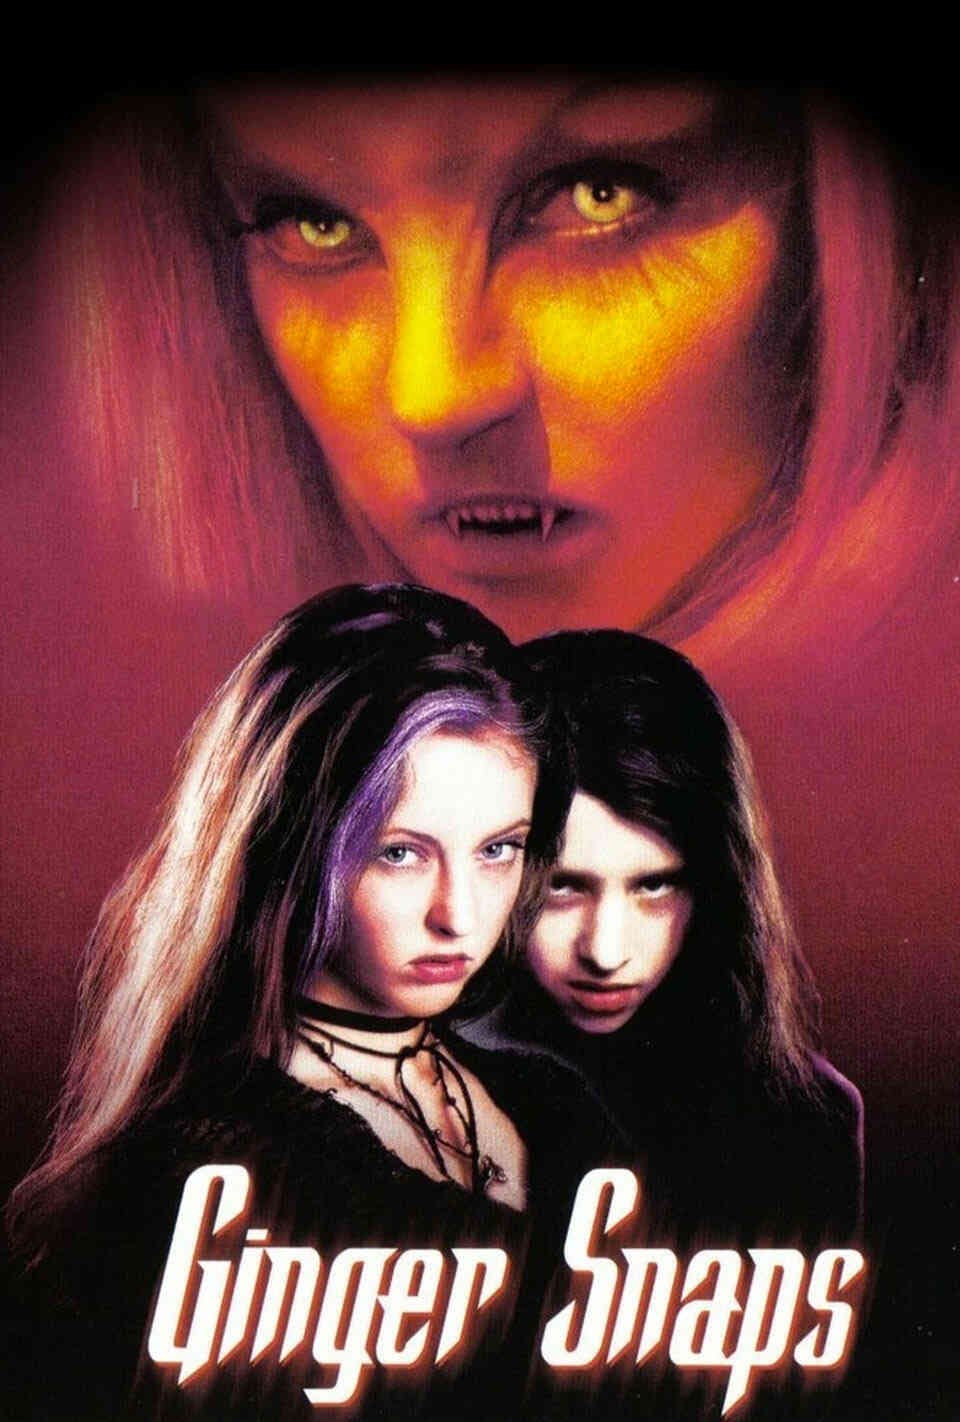 Read Ginger Snaps screenplay (poster)